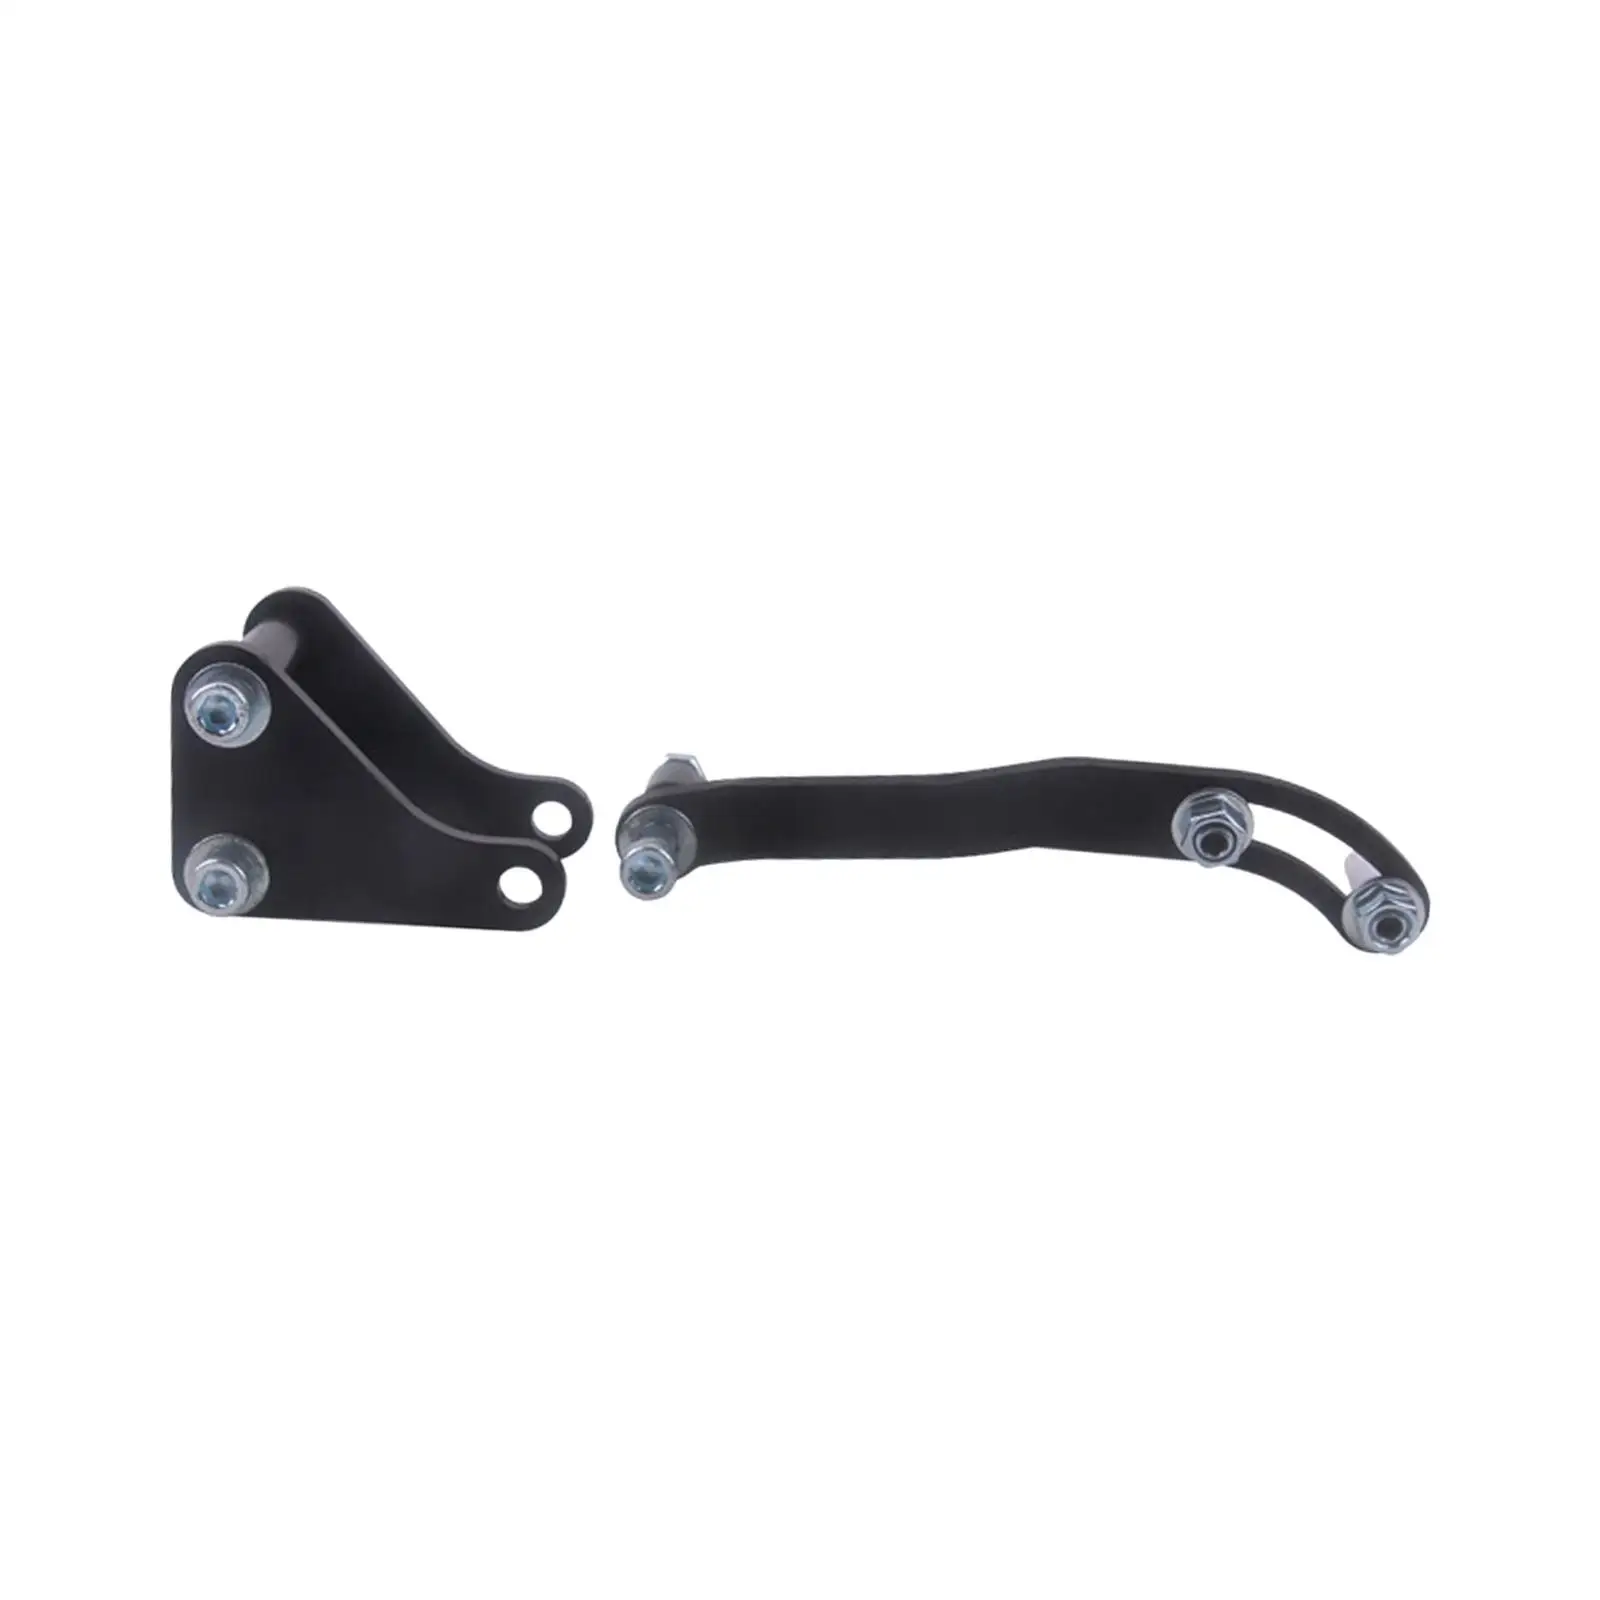 Power Steering Pump Mounting Bracket Easy to Install Durable Assembly for Chevy Sbc Engine 383 305 350 283